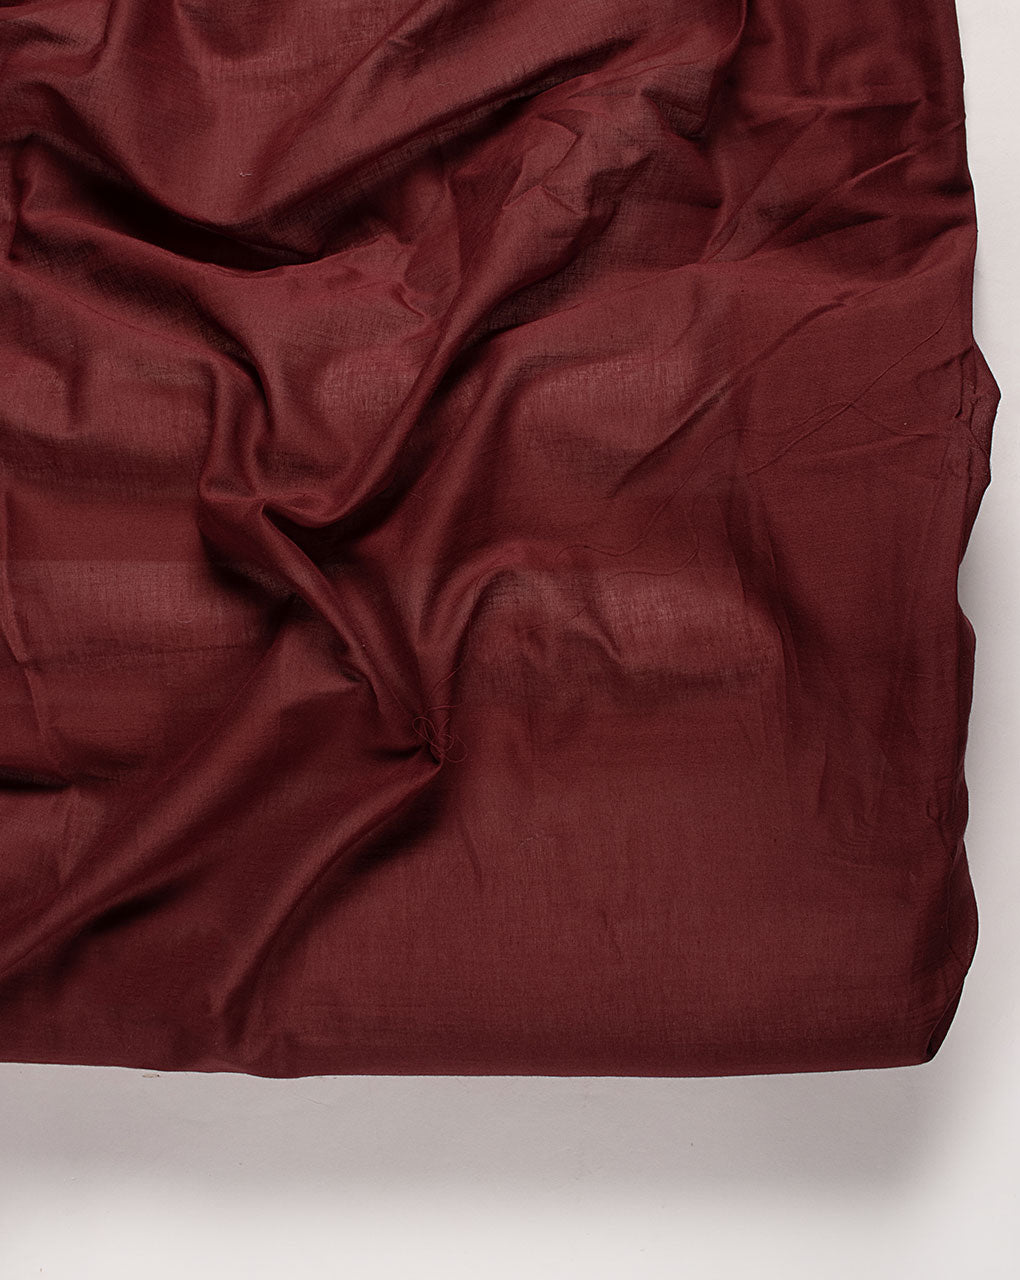 Buy Maroon Colour Fabrics, Plain & Printed Fabric Online @ Low Prices -  SourceItRight